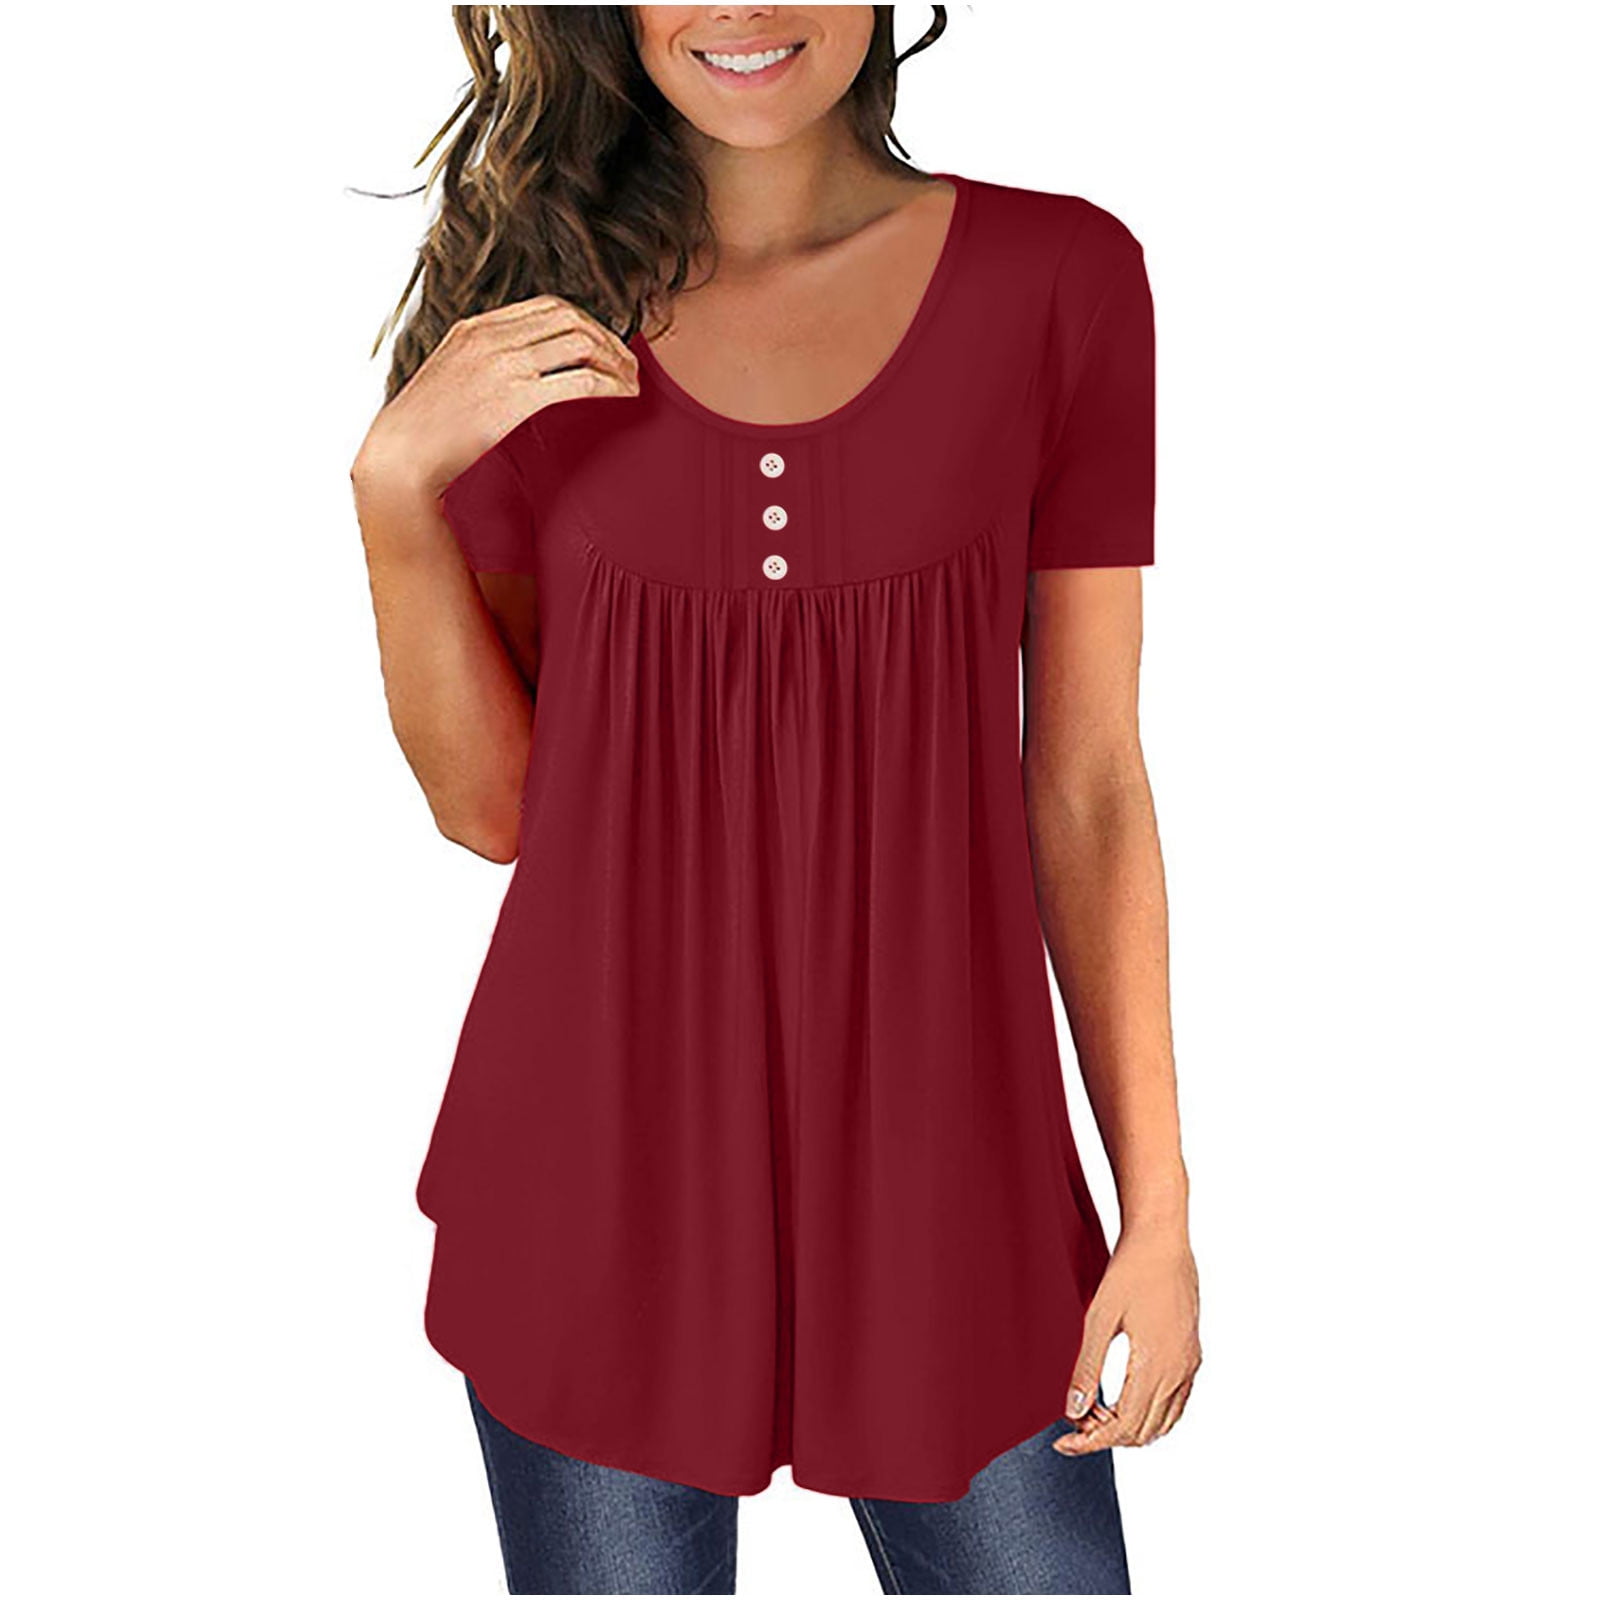 Pntutb Womens Plus Size Clearance,Women's Summer Solid Color Round Neck ...